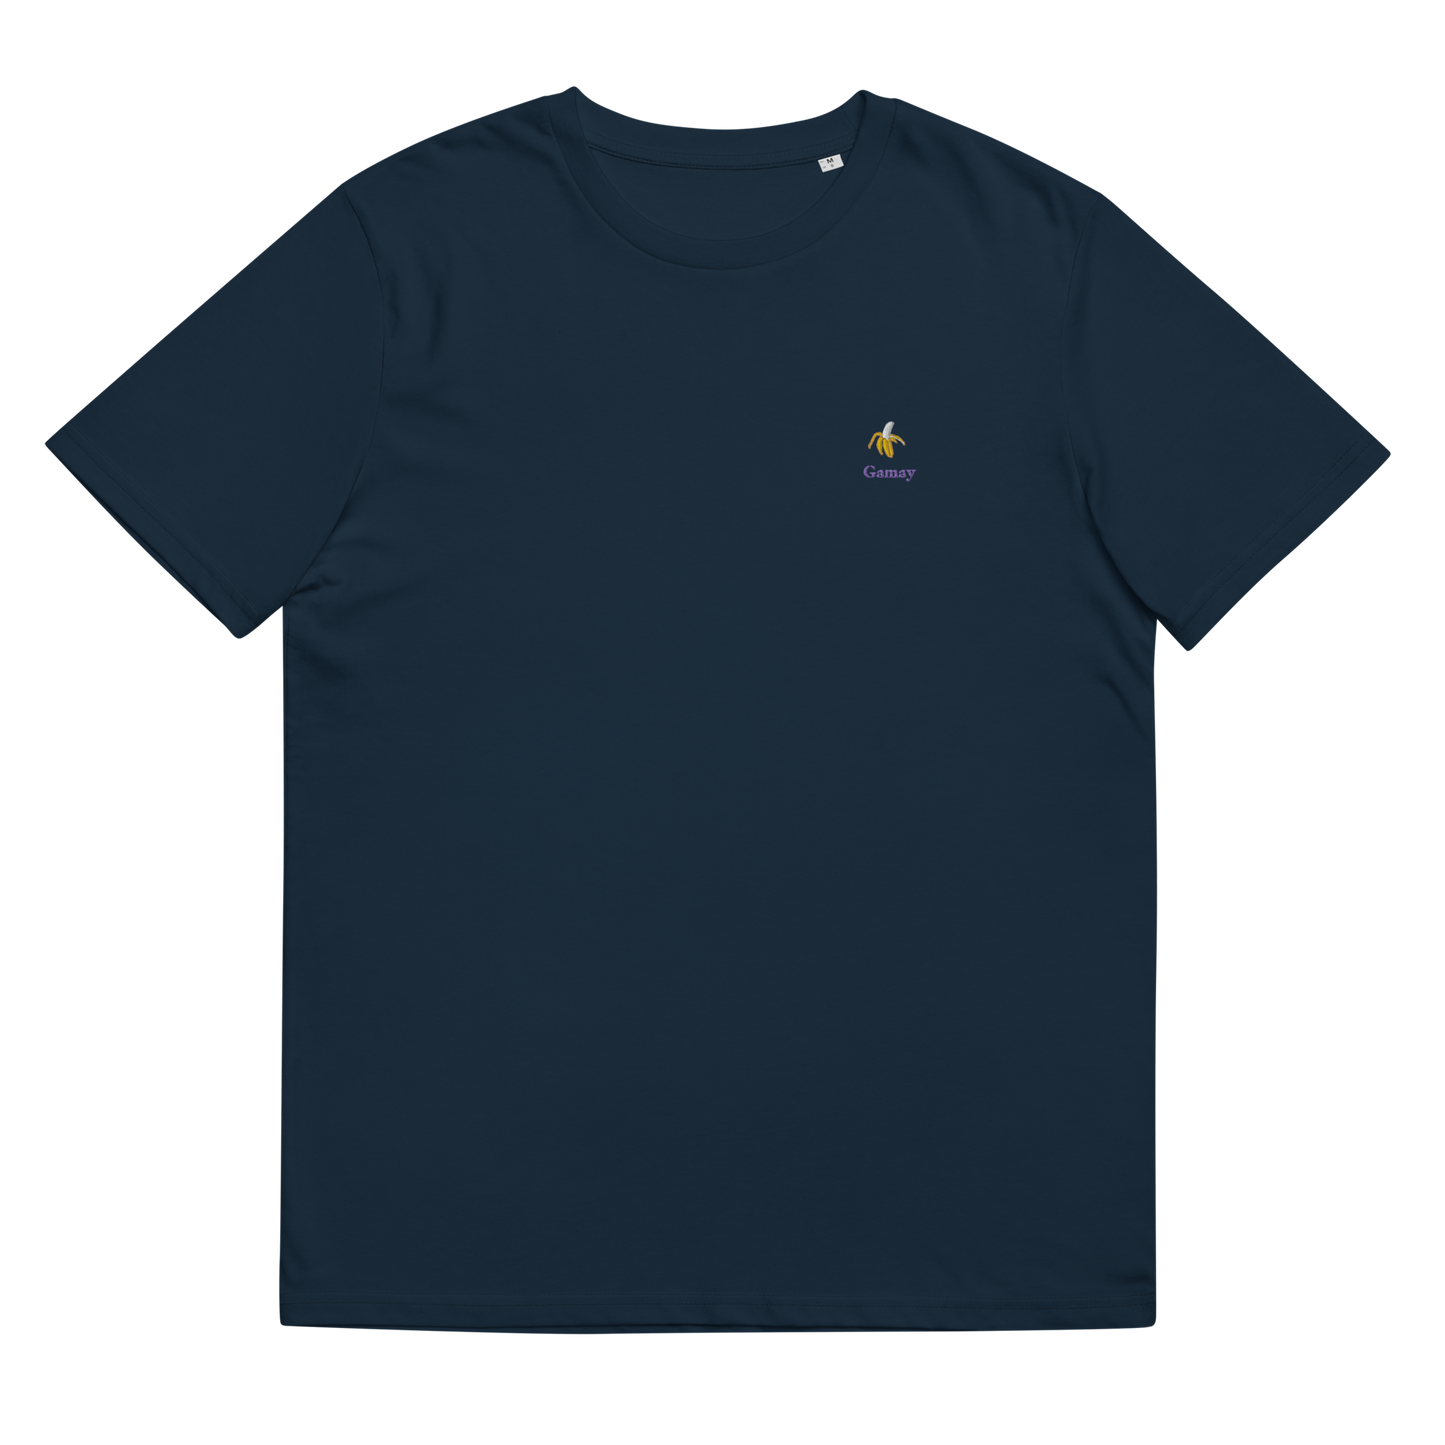 Gamay navy embroidered t-shirt